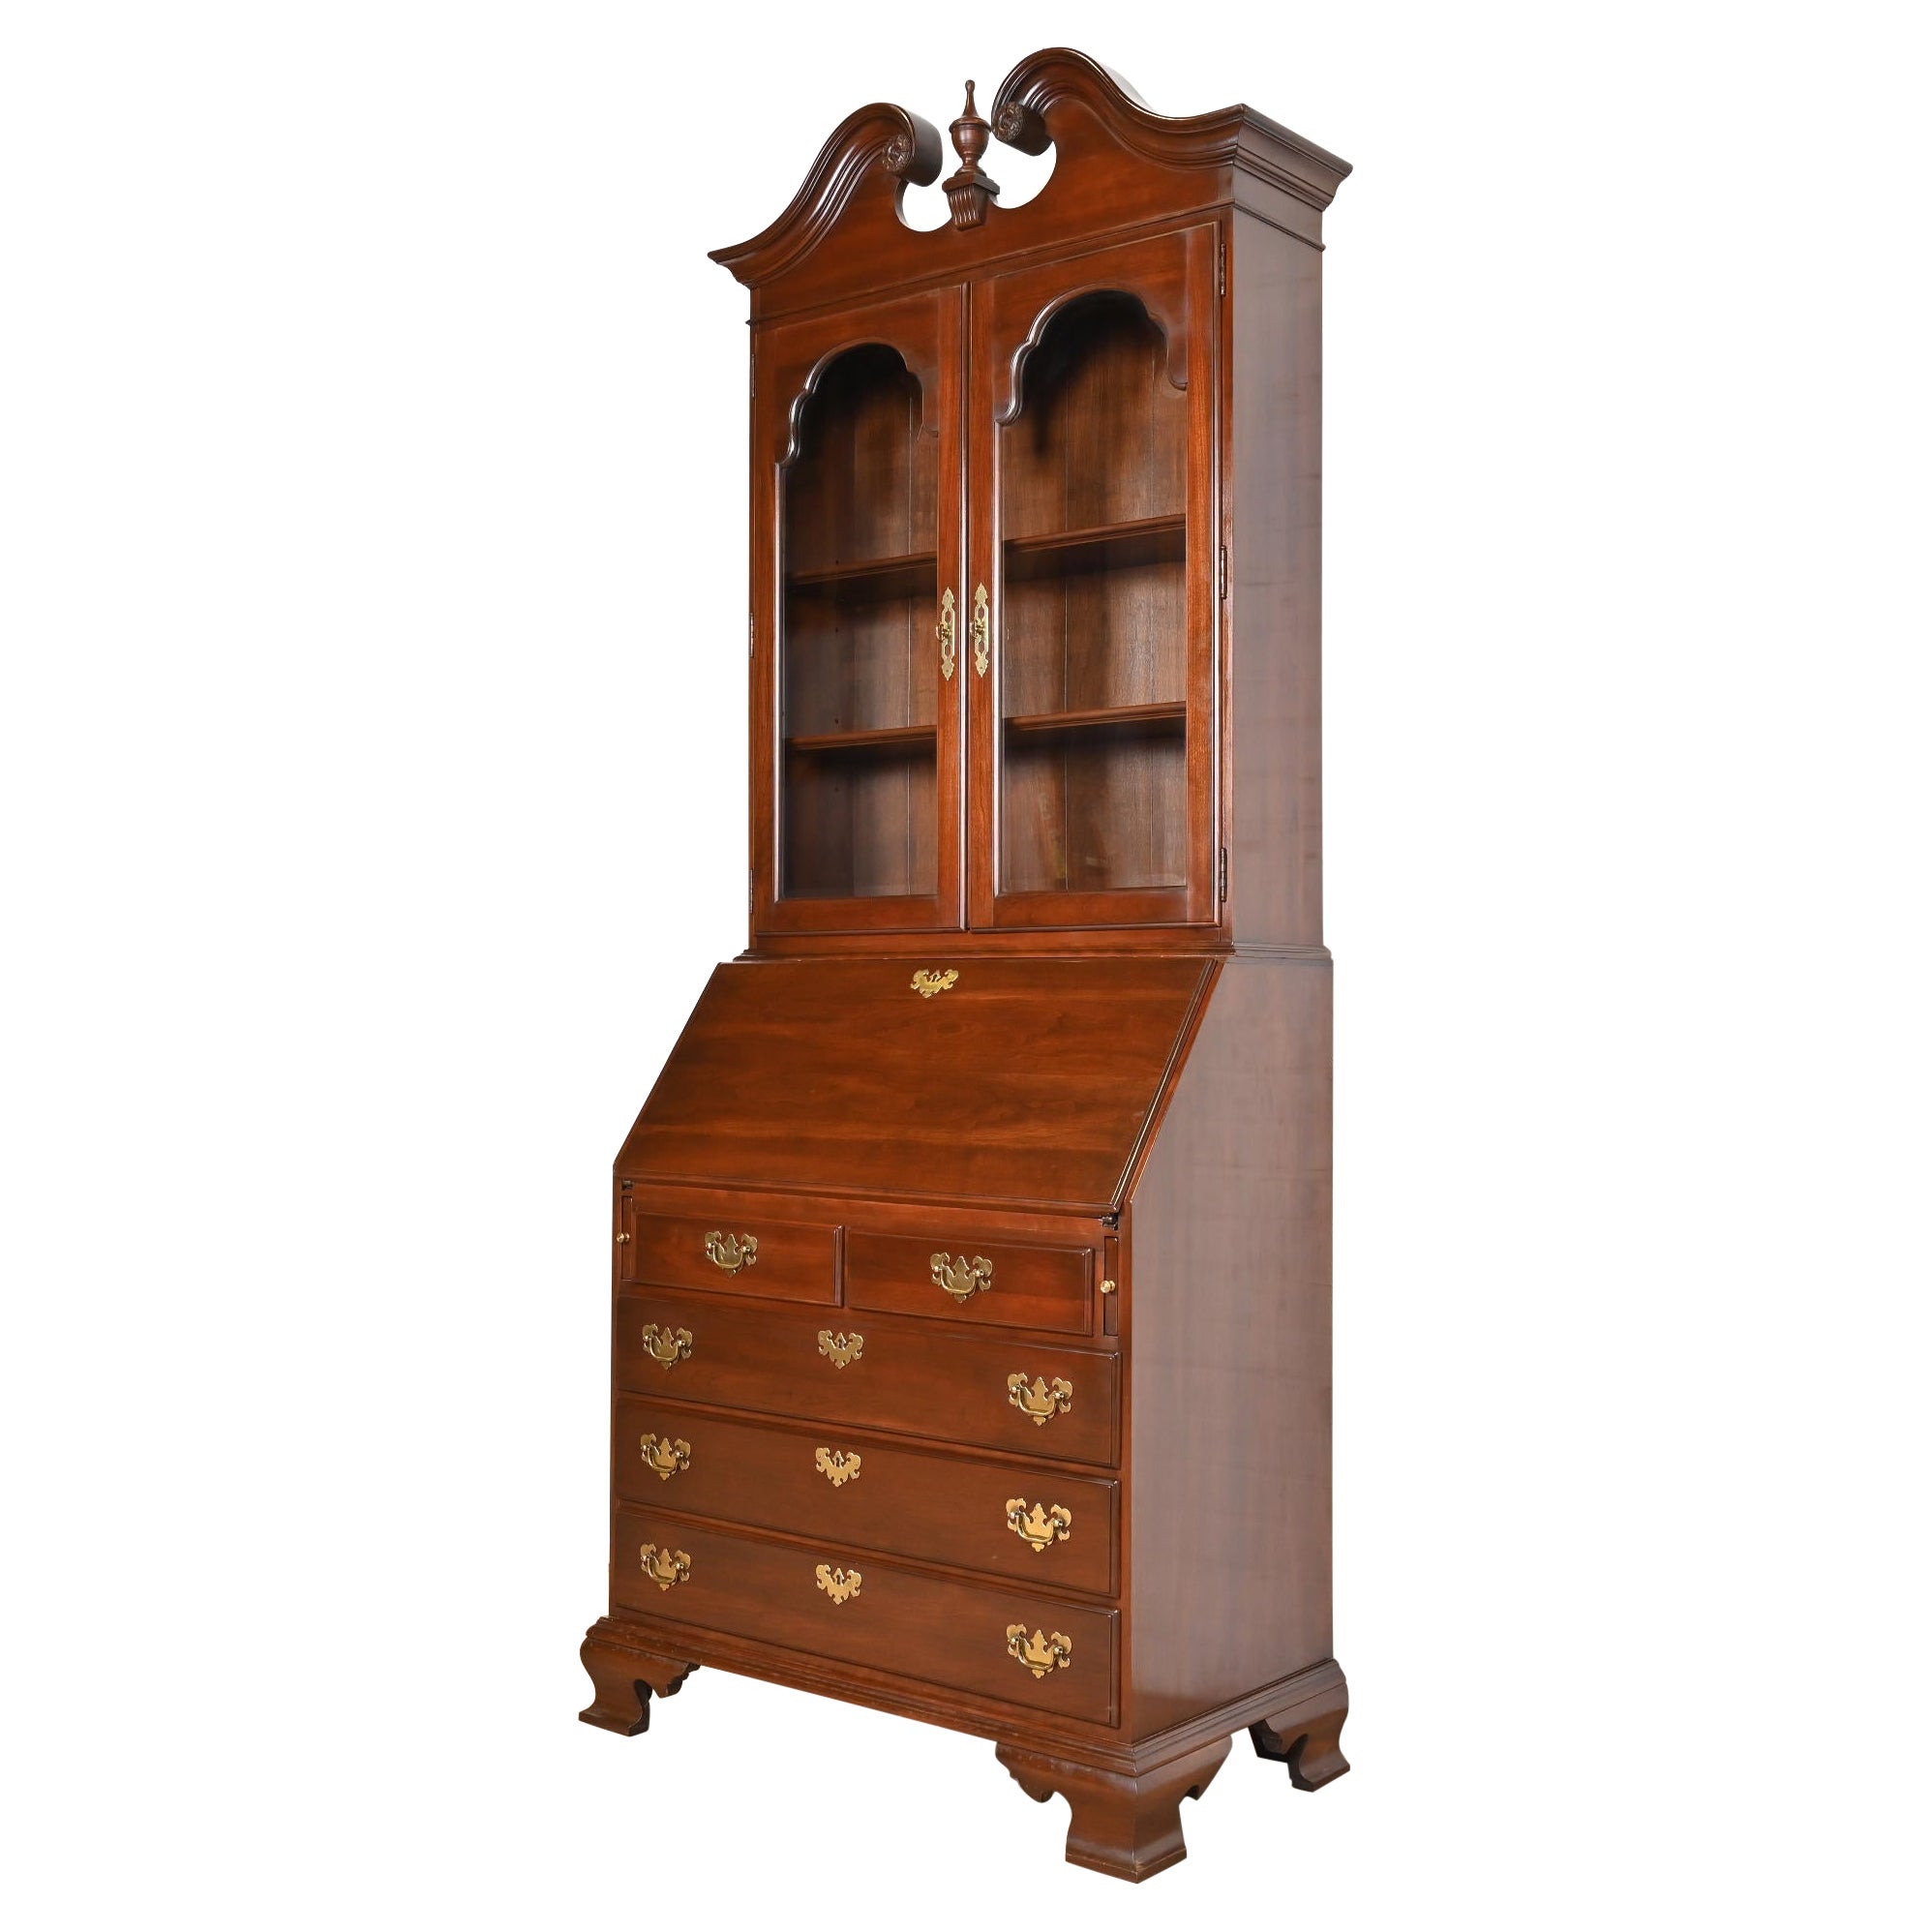 Georgian Cherry Wood Drop Front Secretary Desk With Bookcase Hutch For Sale